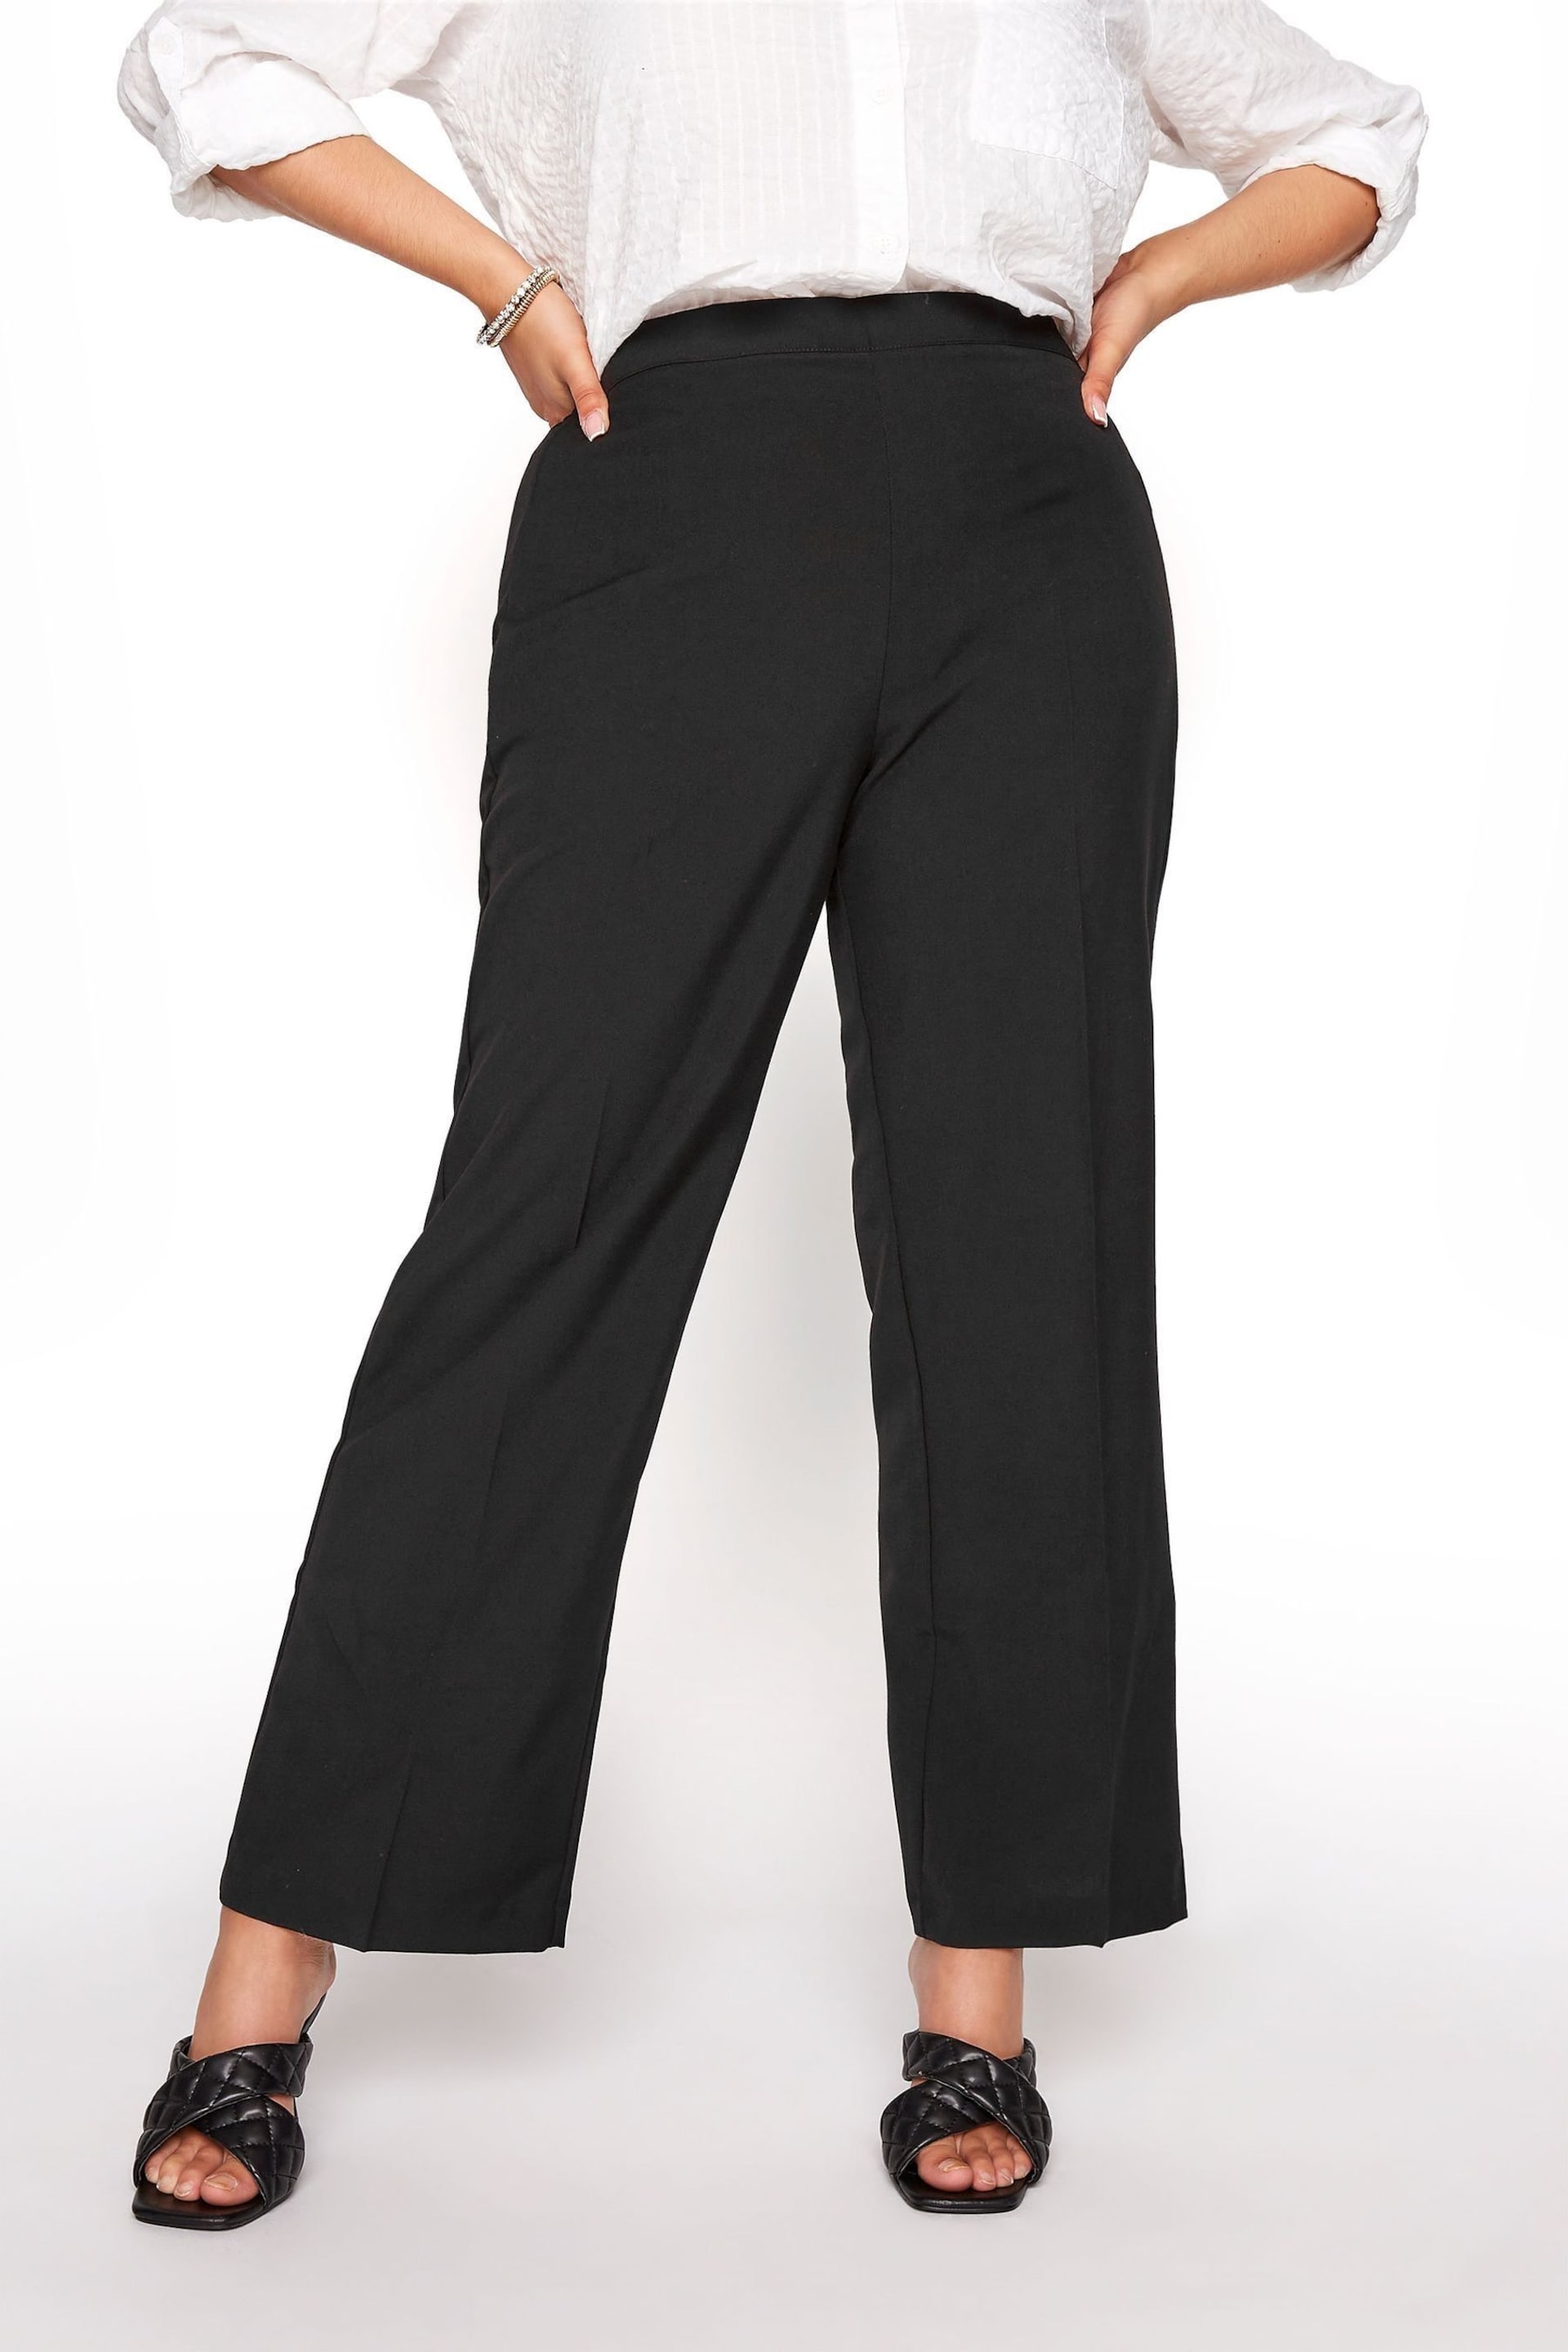 Yours Curve Black Elasticated Stretch Straight Leg Trousers - Image 1 of 6